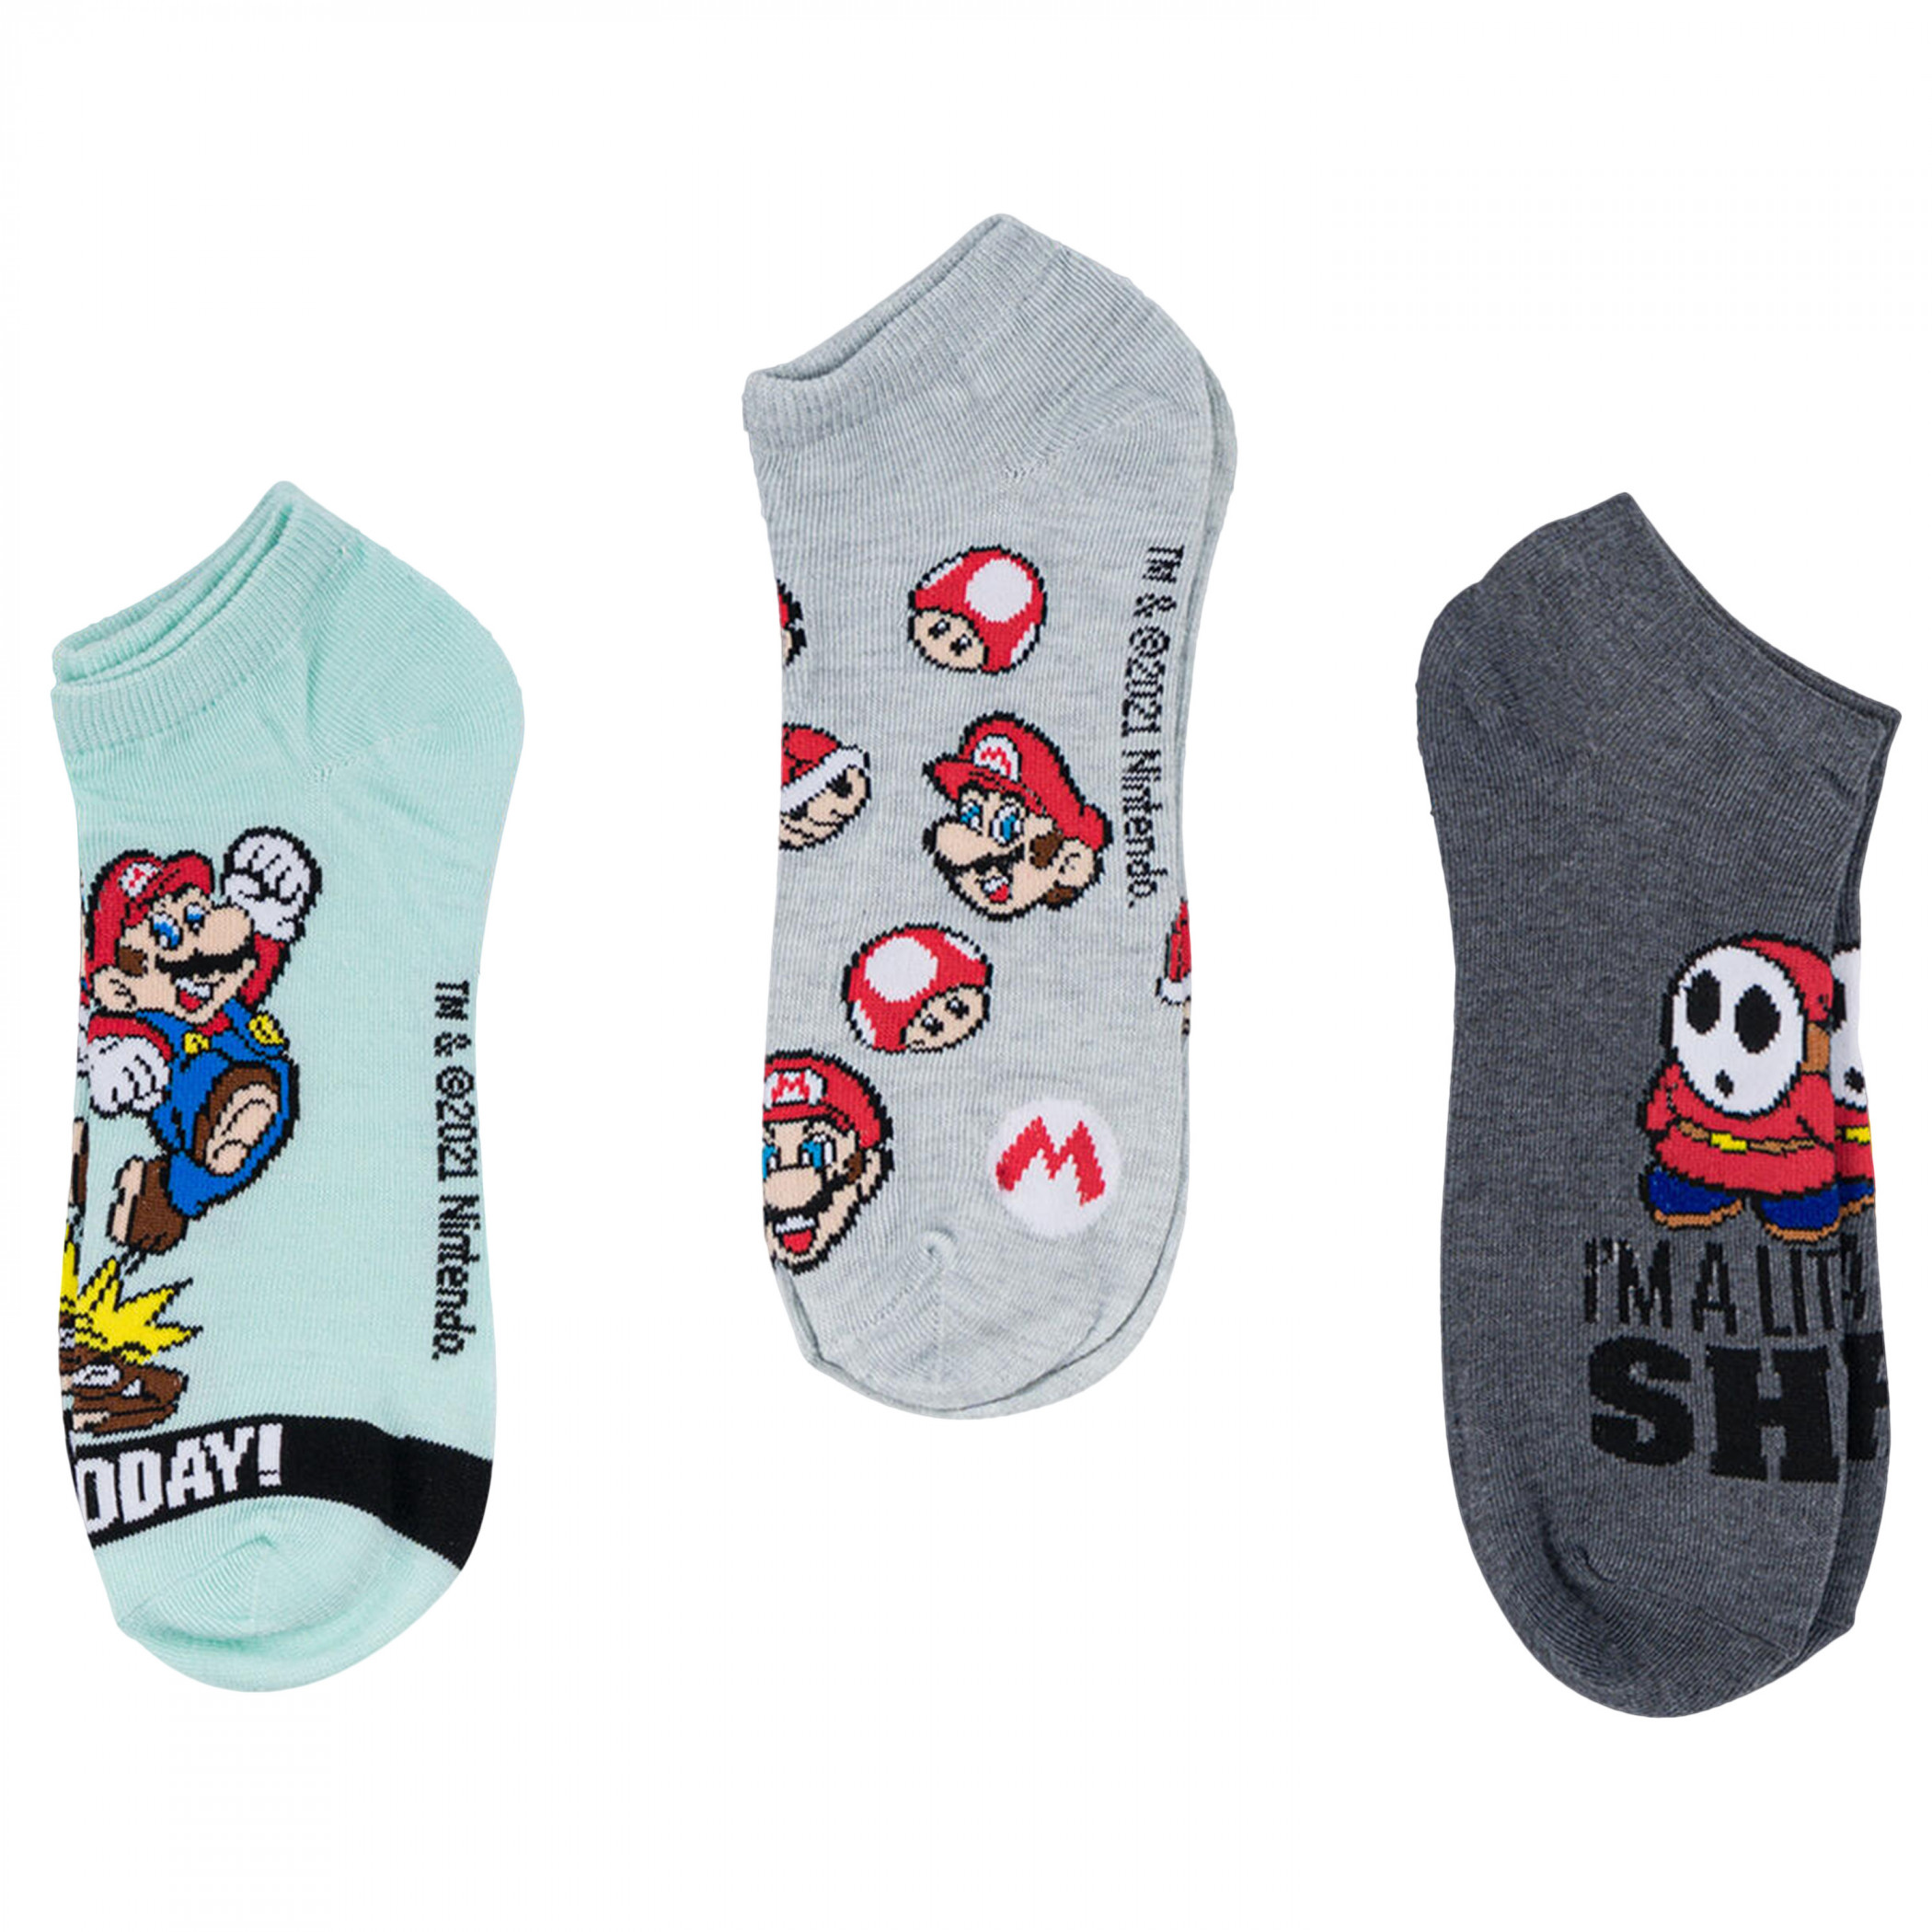 Super Mario Bros. I'm a Little Shy 3-Pair Pack of Men's Ankle Socks